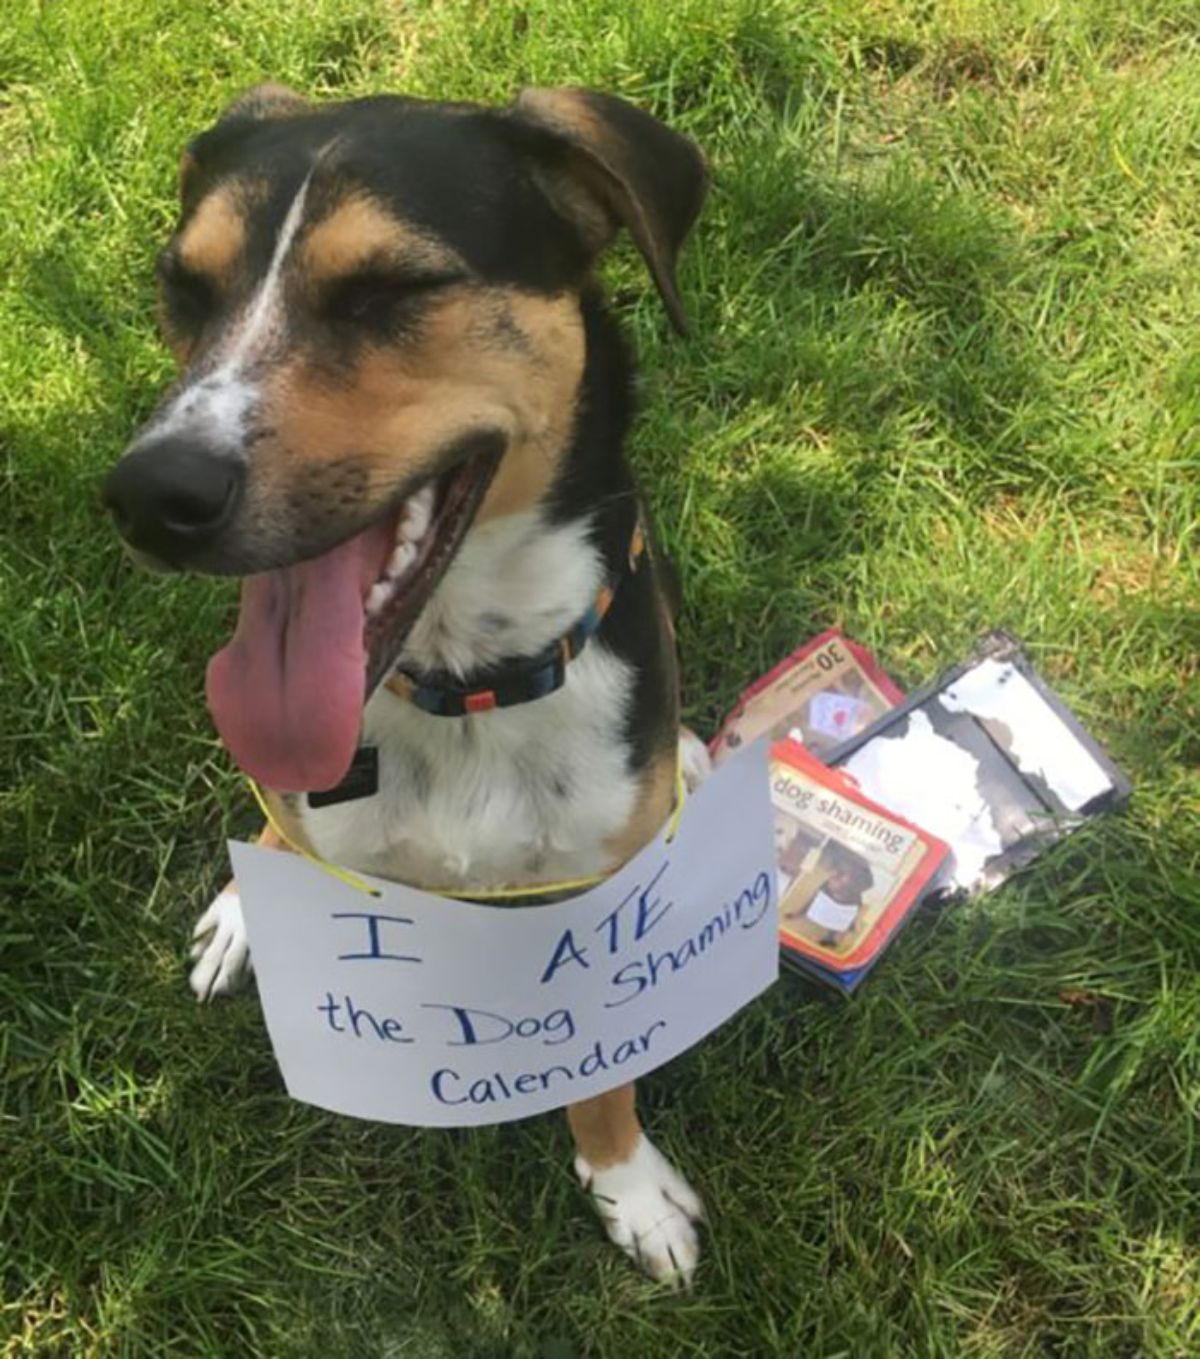 black brown and white dog sitting on grass with a note saying "I ate the dog shaming calendar"